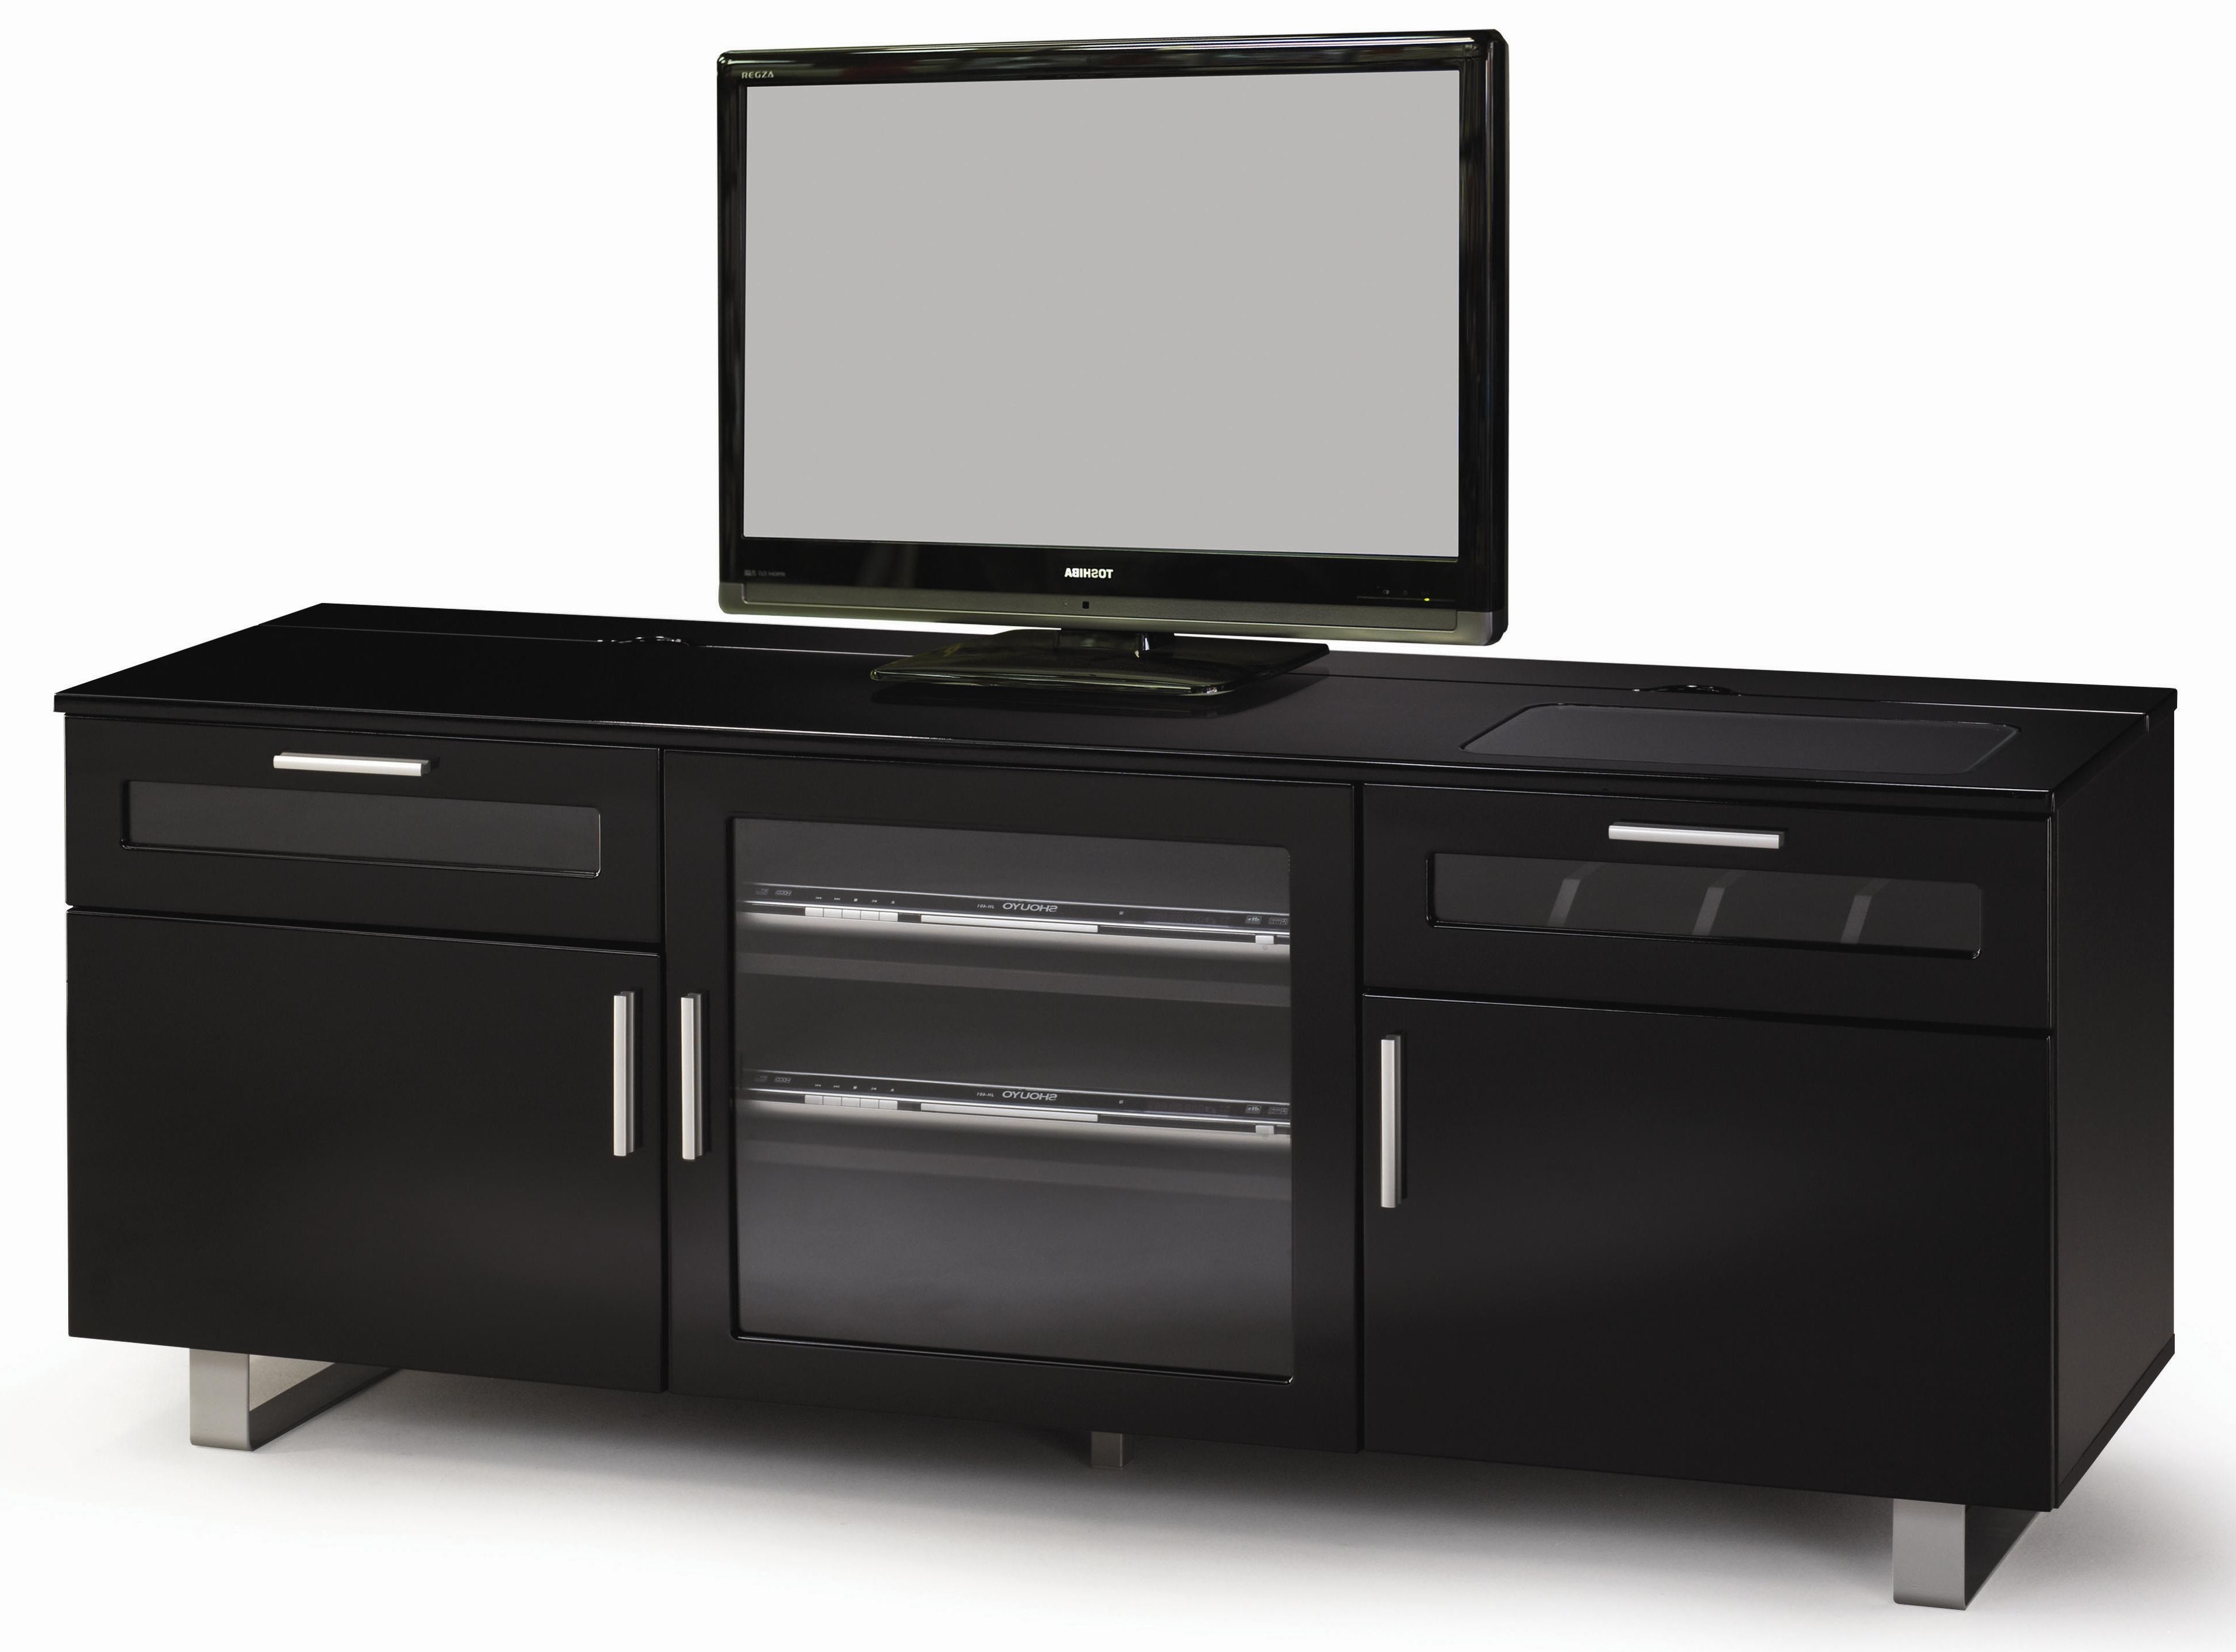 Fashionable Coaster Tv Stands 700672 Contemporary Tv Console With High Gloss With Regard To Modern Contemporary Tv Stands (View 20 of 20)